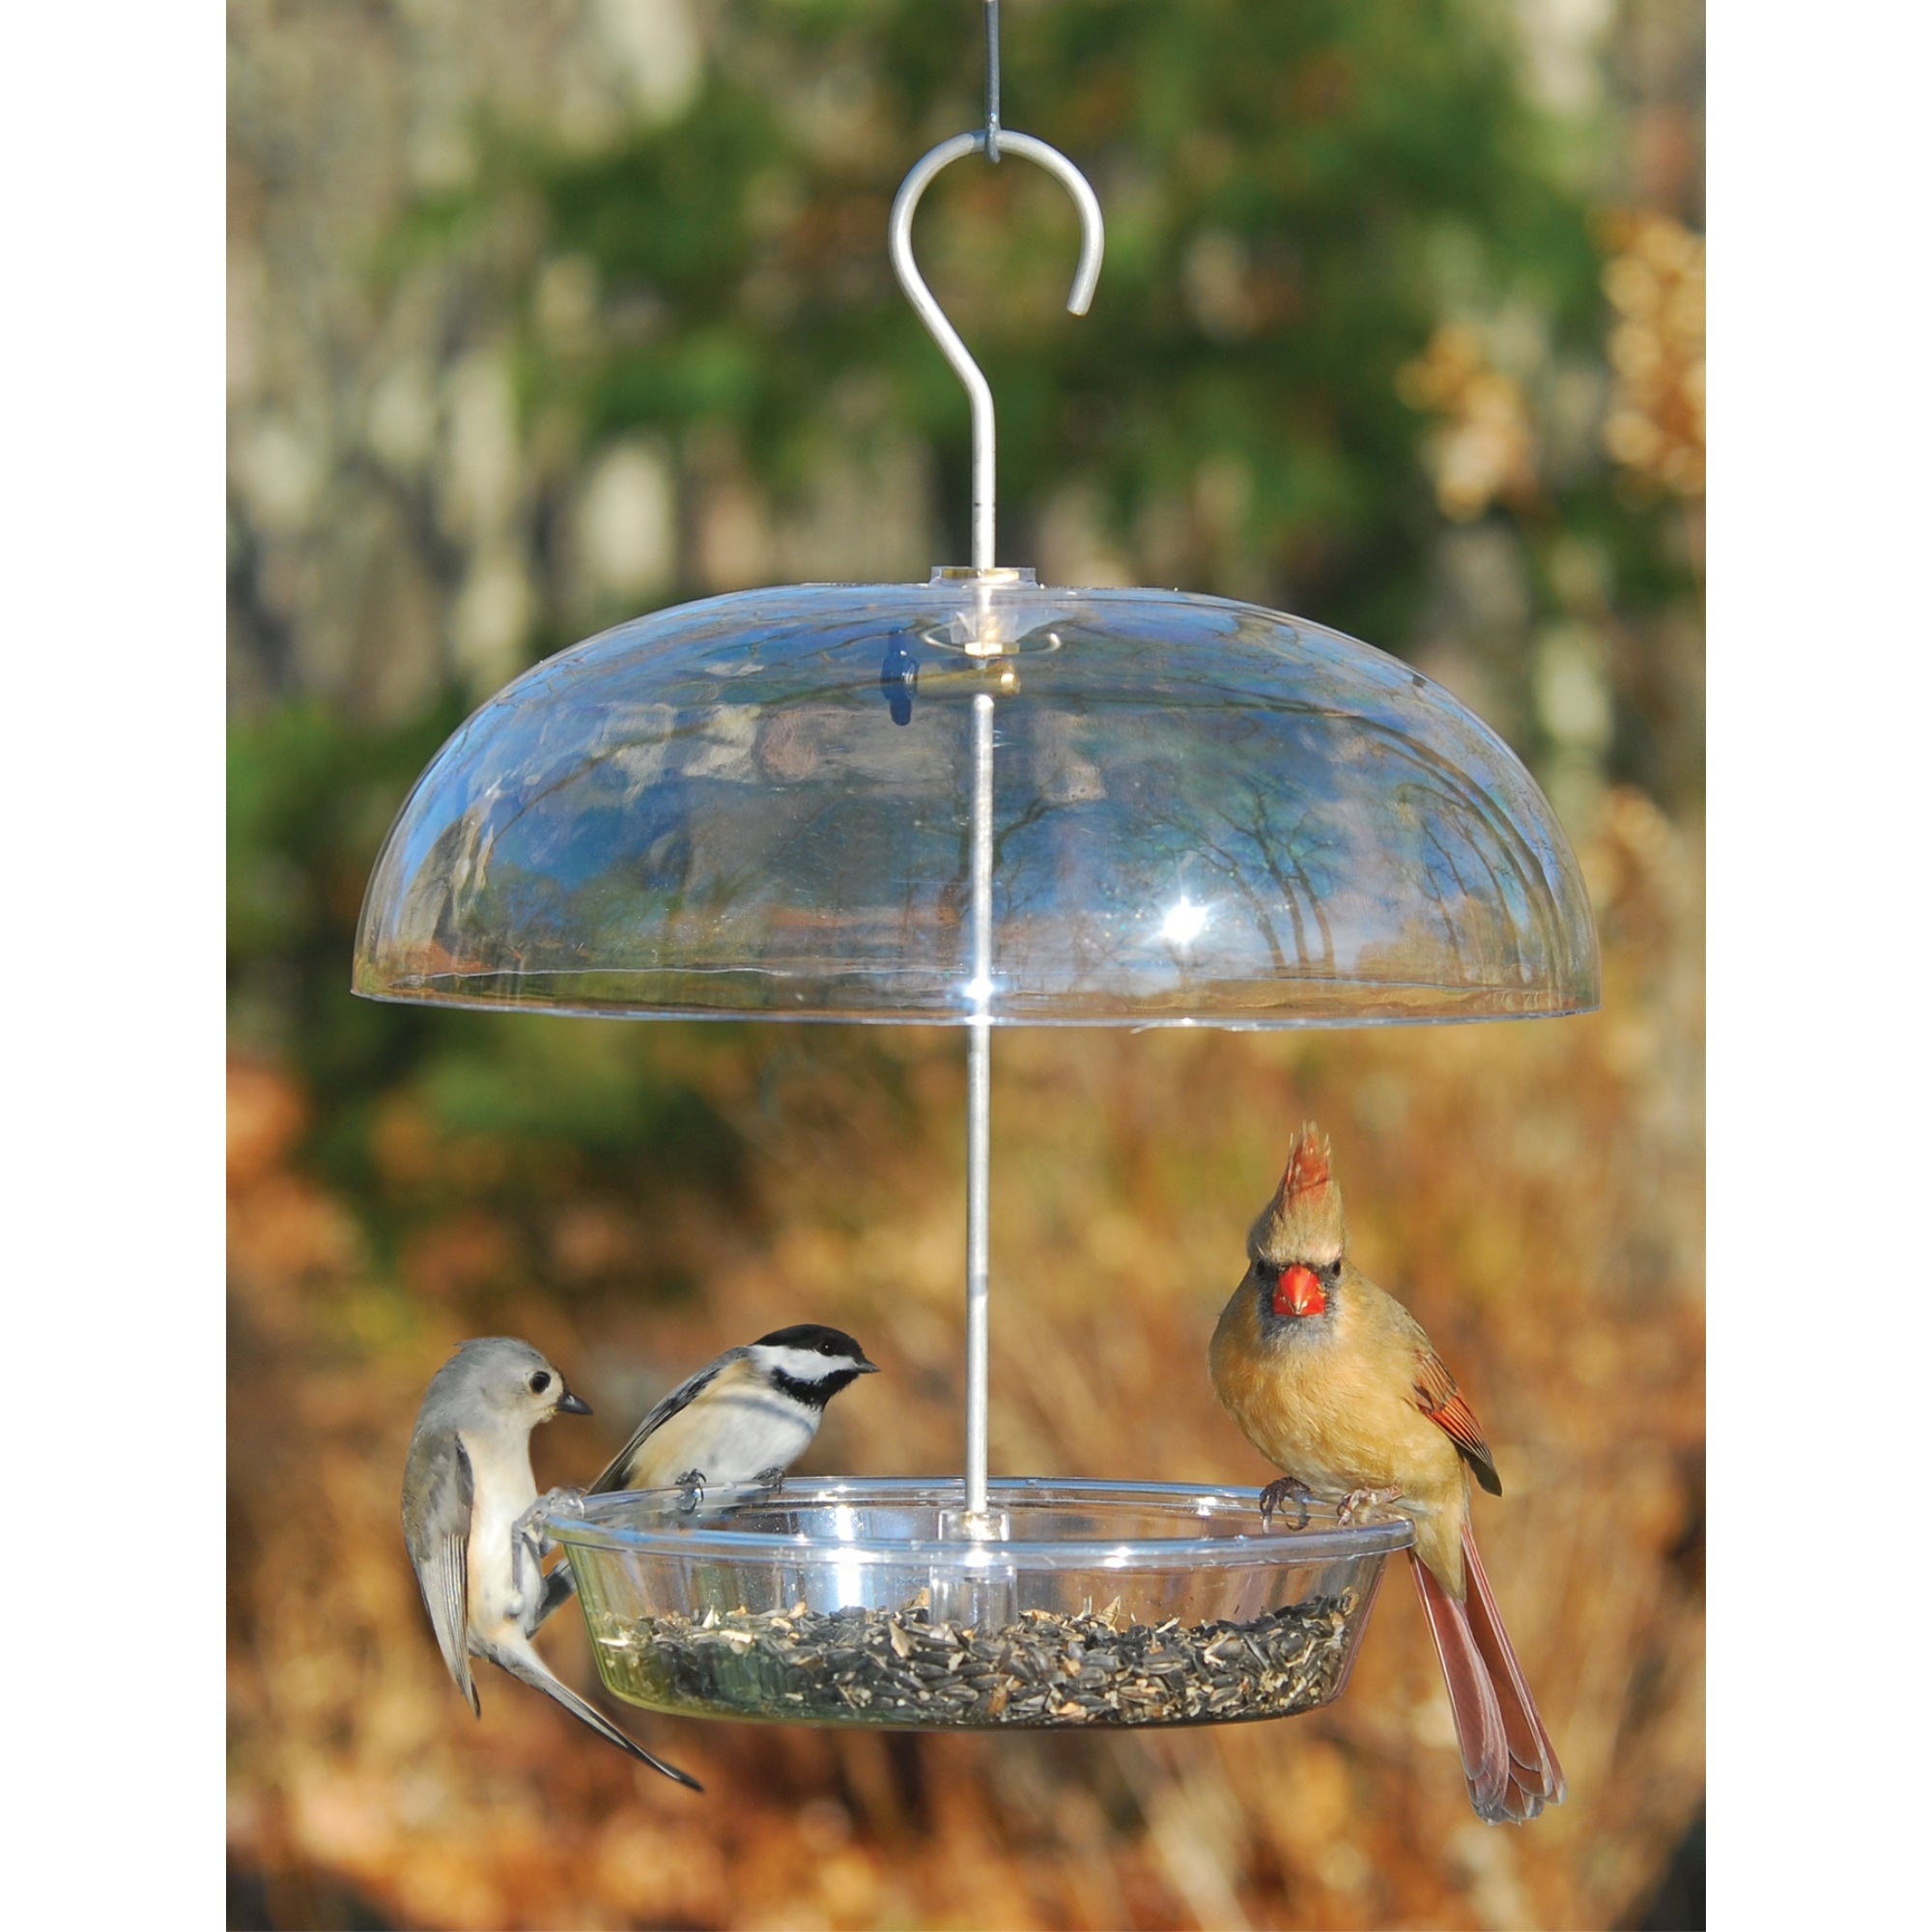 Cole's Bountiful Bowl Wild Bird Bowl Feeder with Adjustable Dome, Clear Polycarbonate, 12"